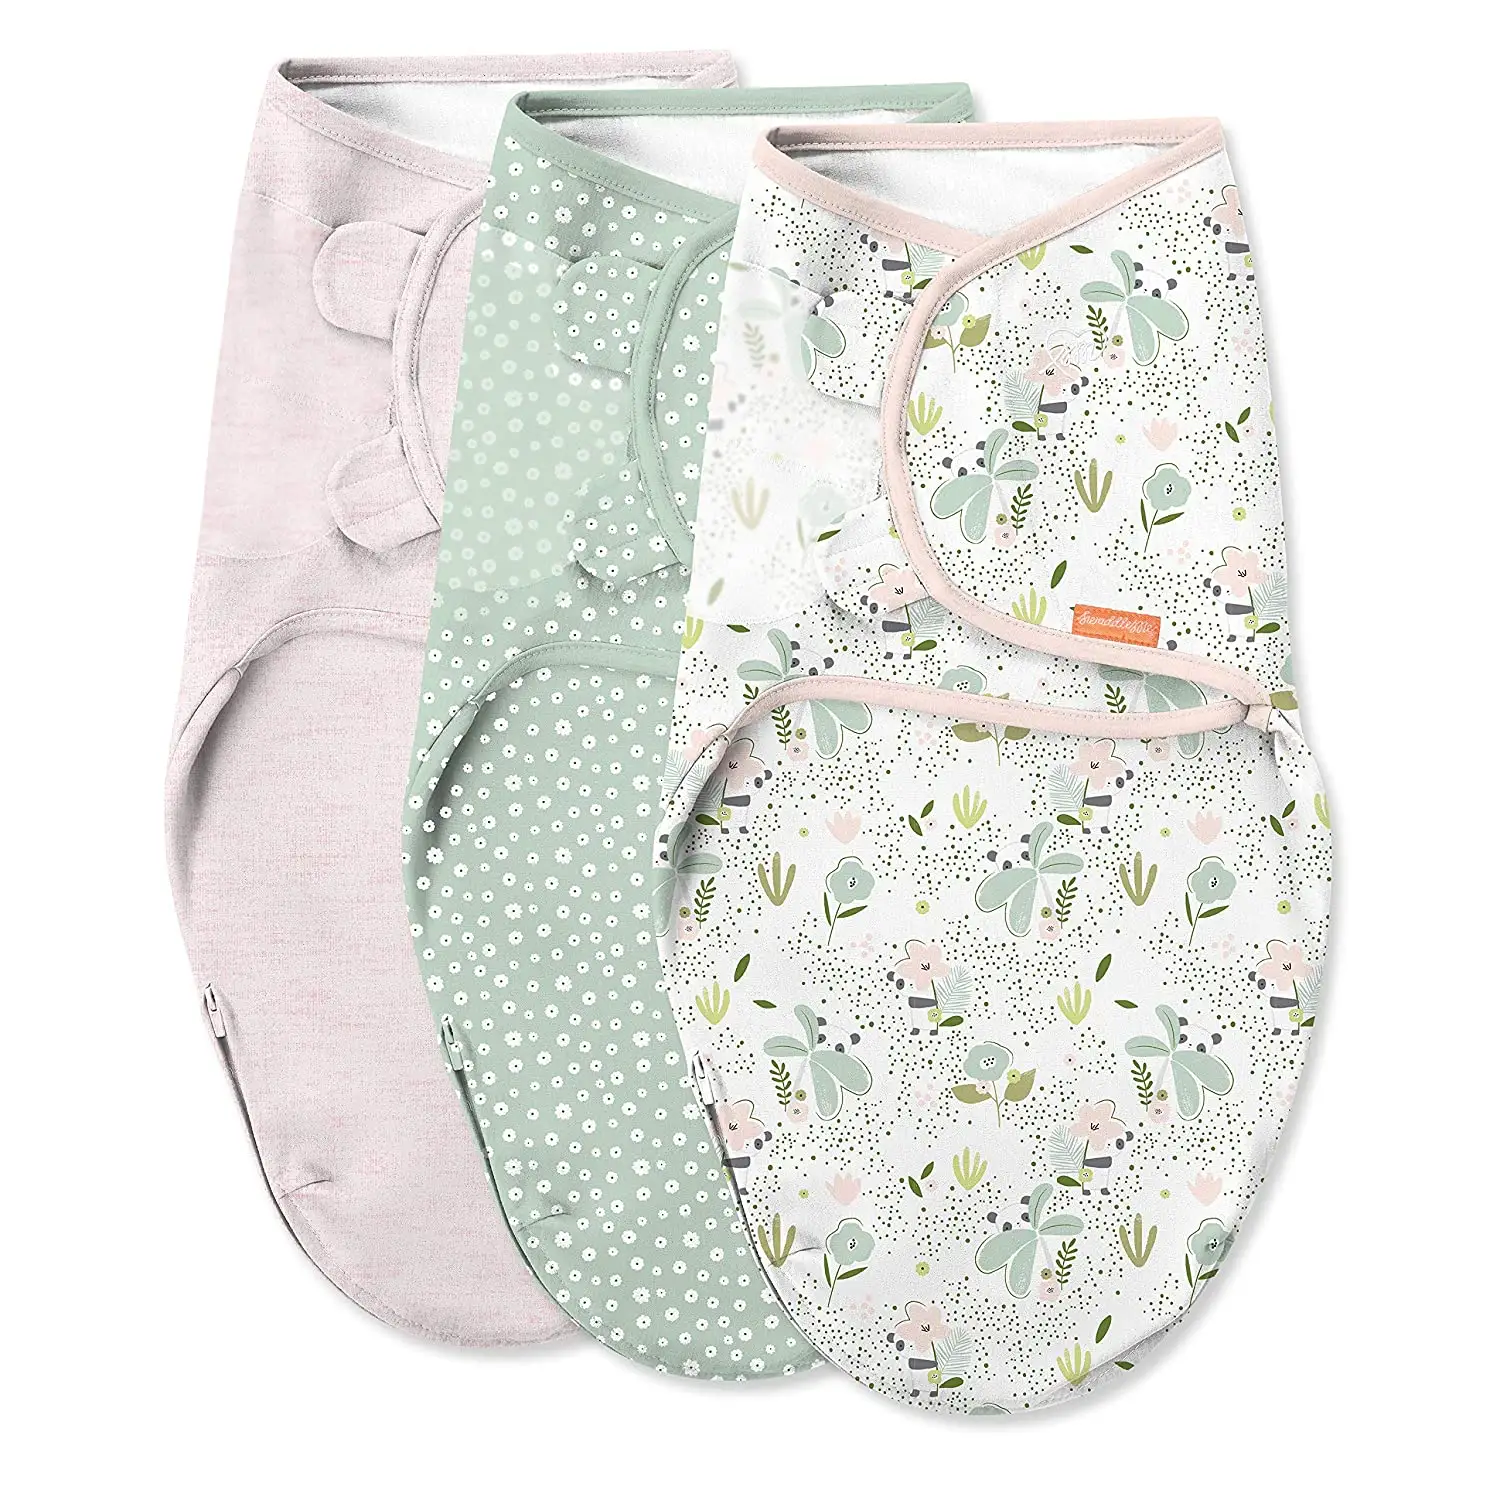 Hot sales wearable infant newborn swaddle cotton baby swaddle baby sleeping bag